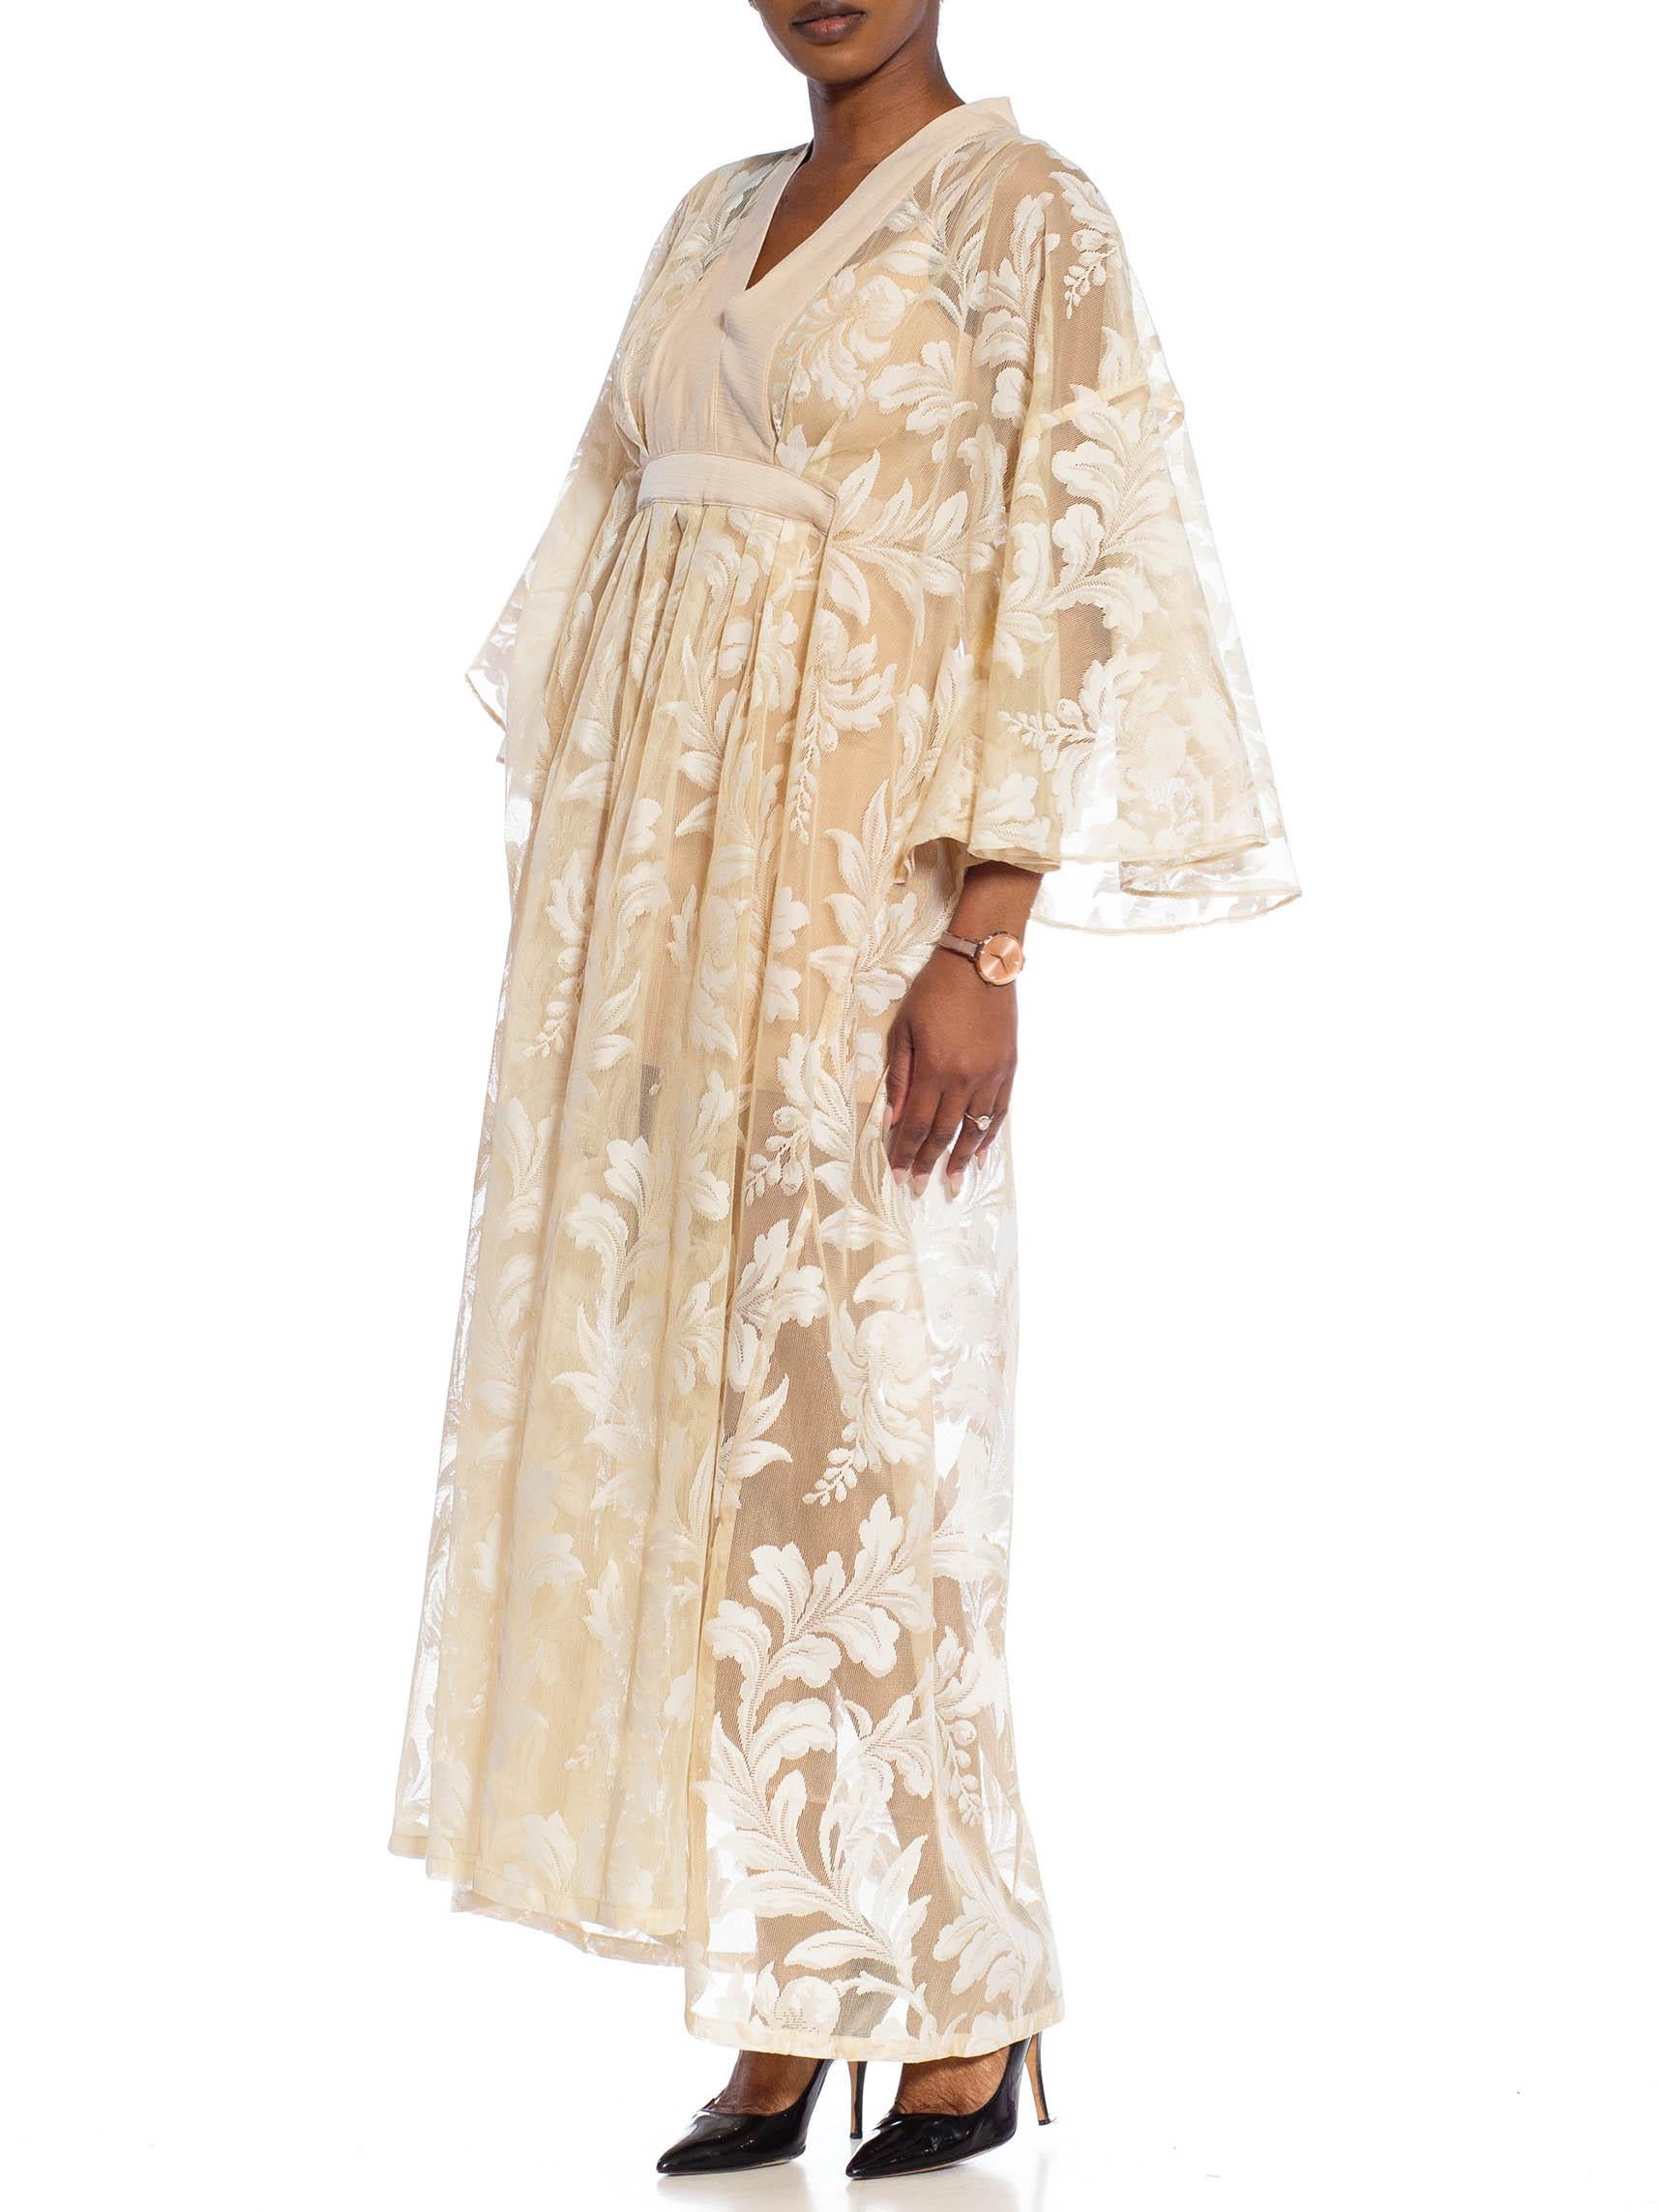 MORPHEW COLLECTION Beige Poly/Nylon Tropical Foliage Lace Kaftan In Excellent Condition For Sale In New York, NY